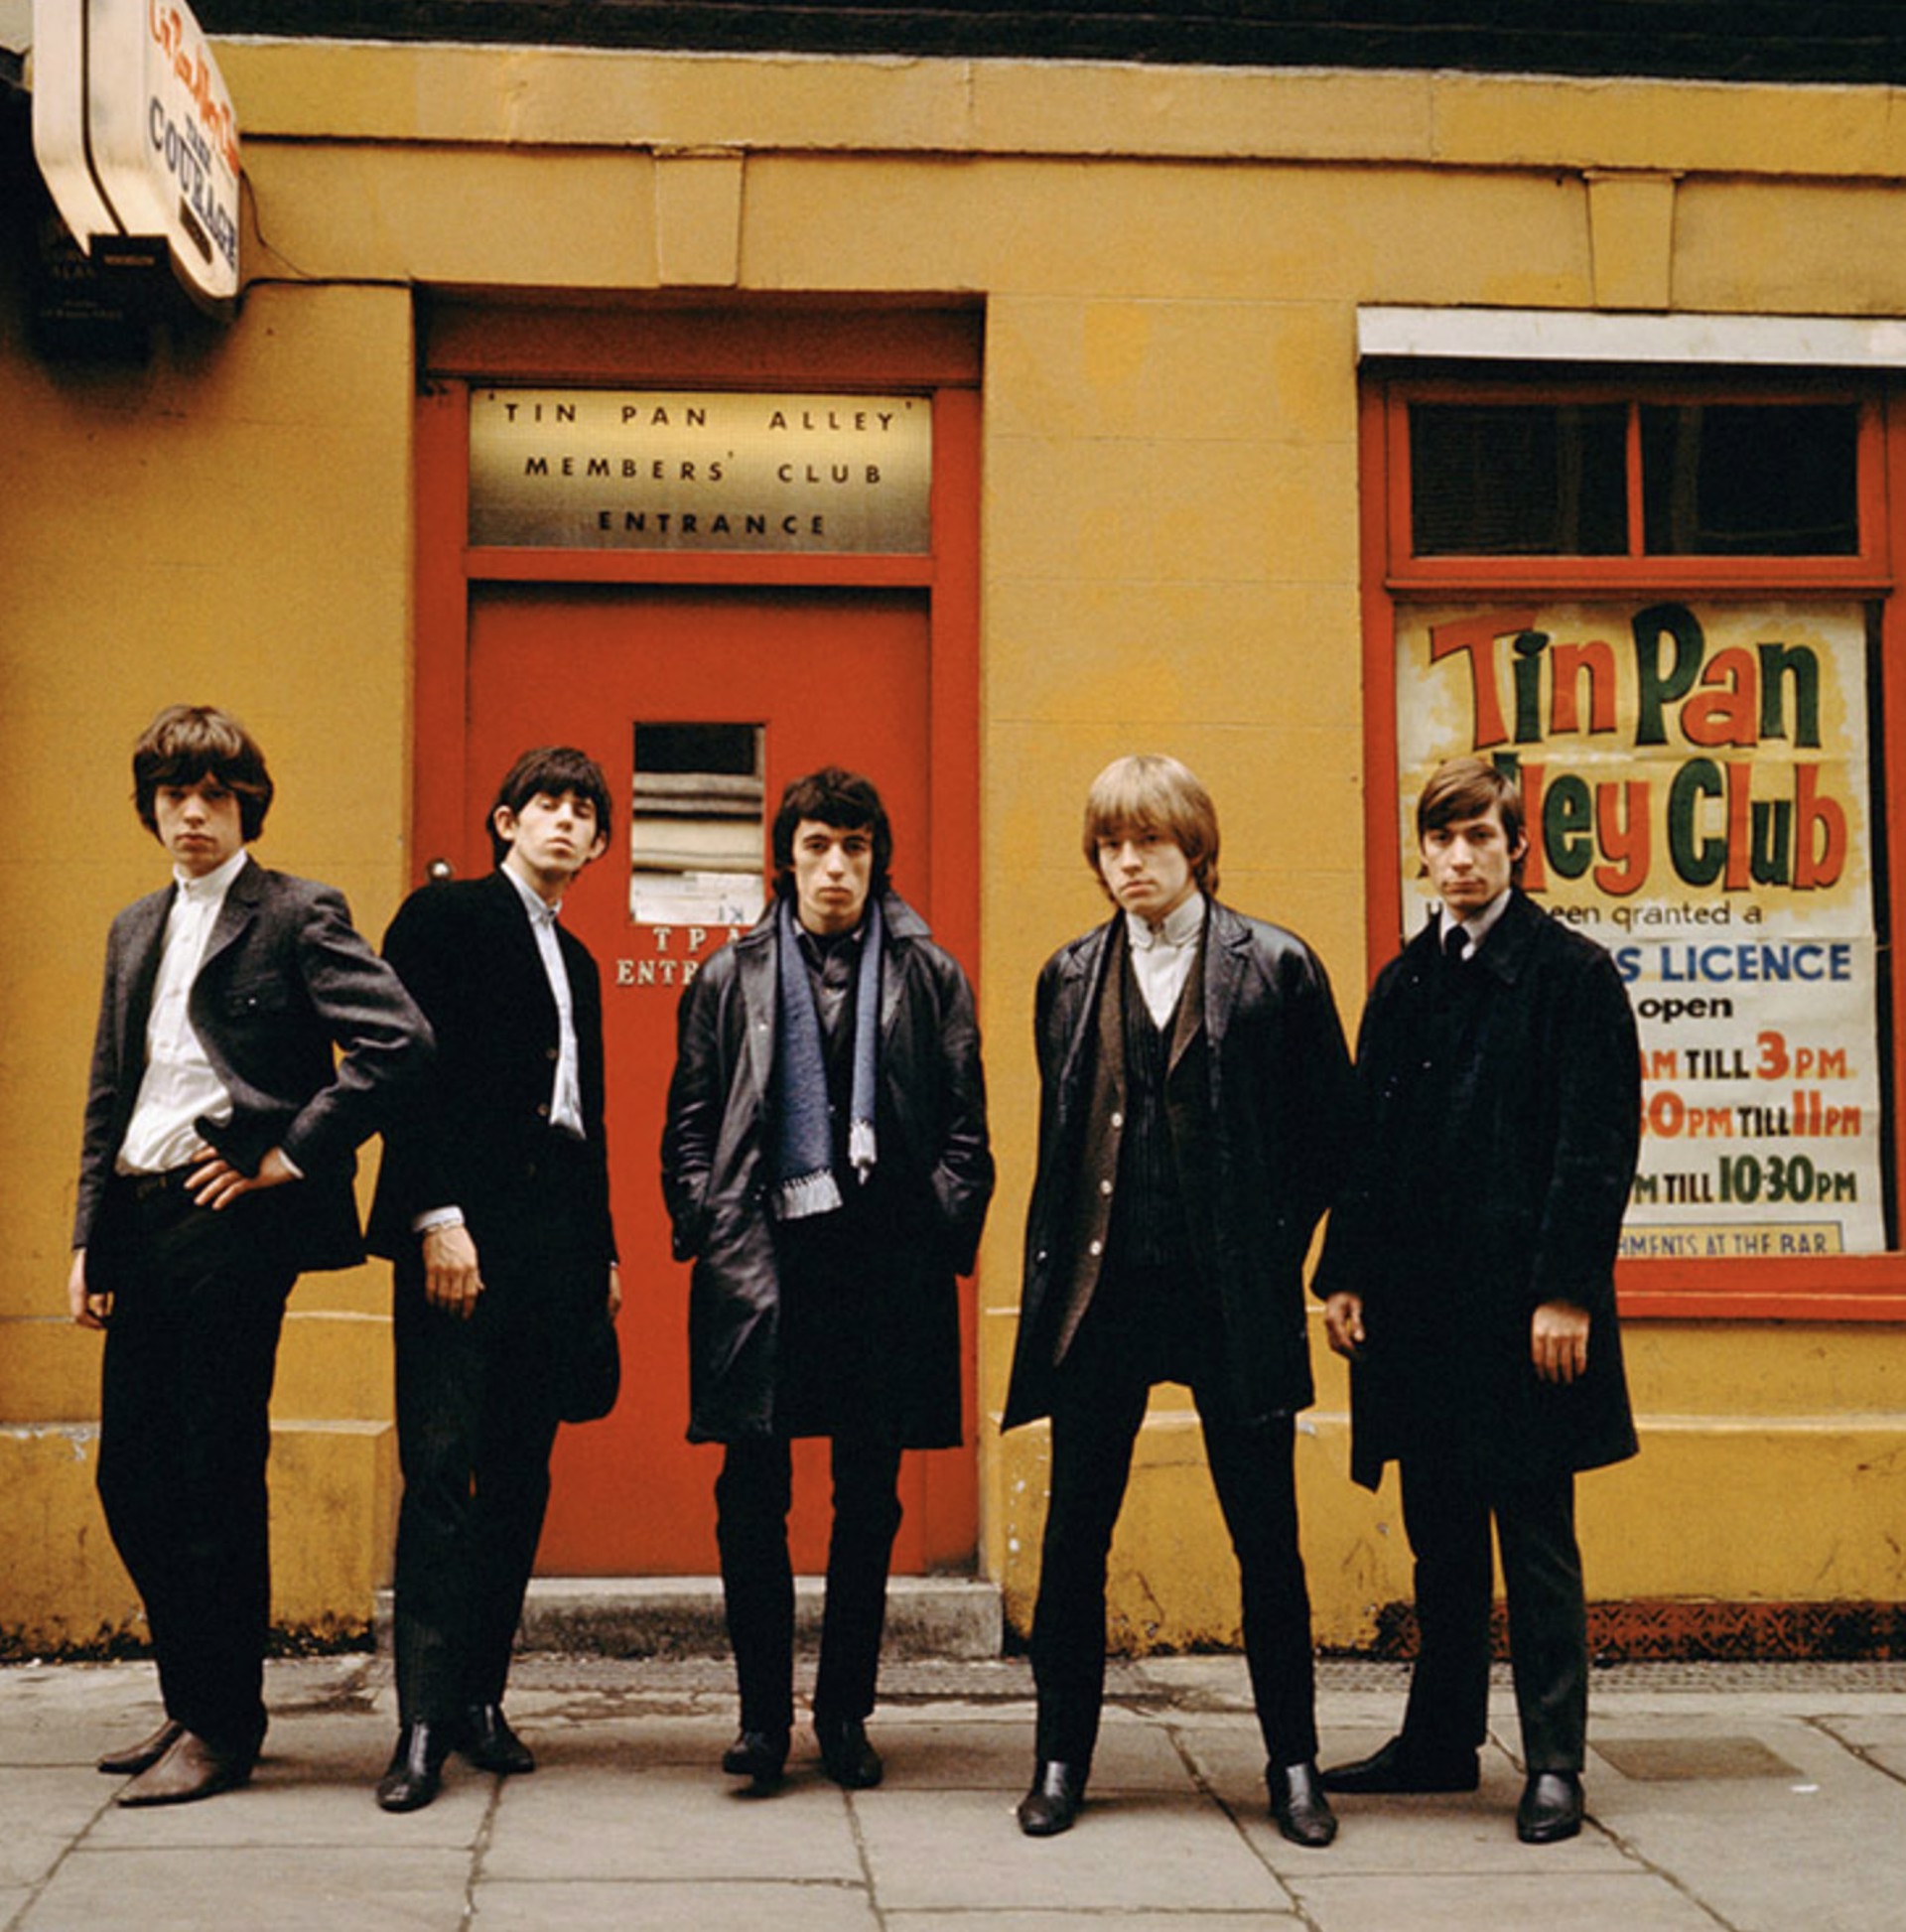 Rolling Stones Tin Pan Alley (colour) by Terry O'Neill